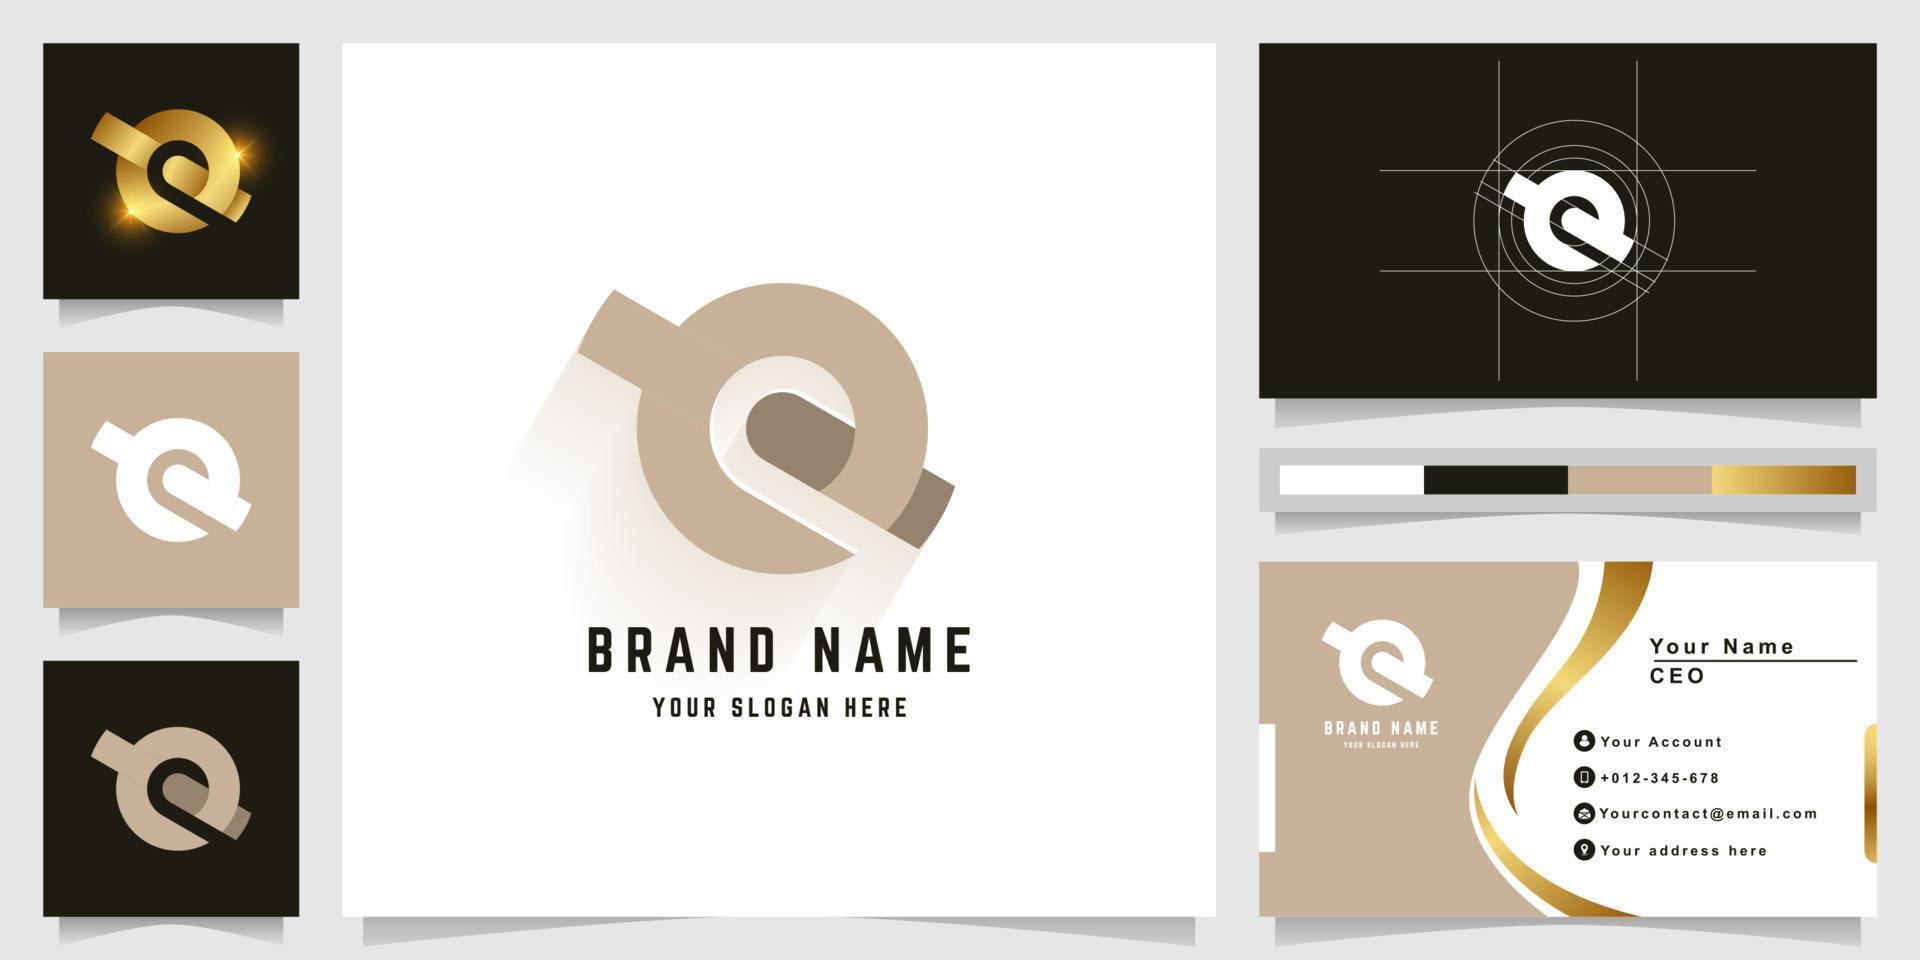 Letter YQ or Ye monogram logo with business card design vector